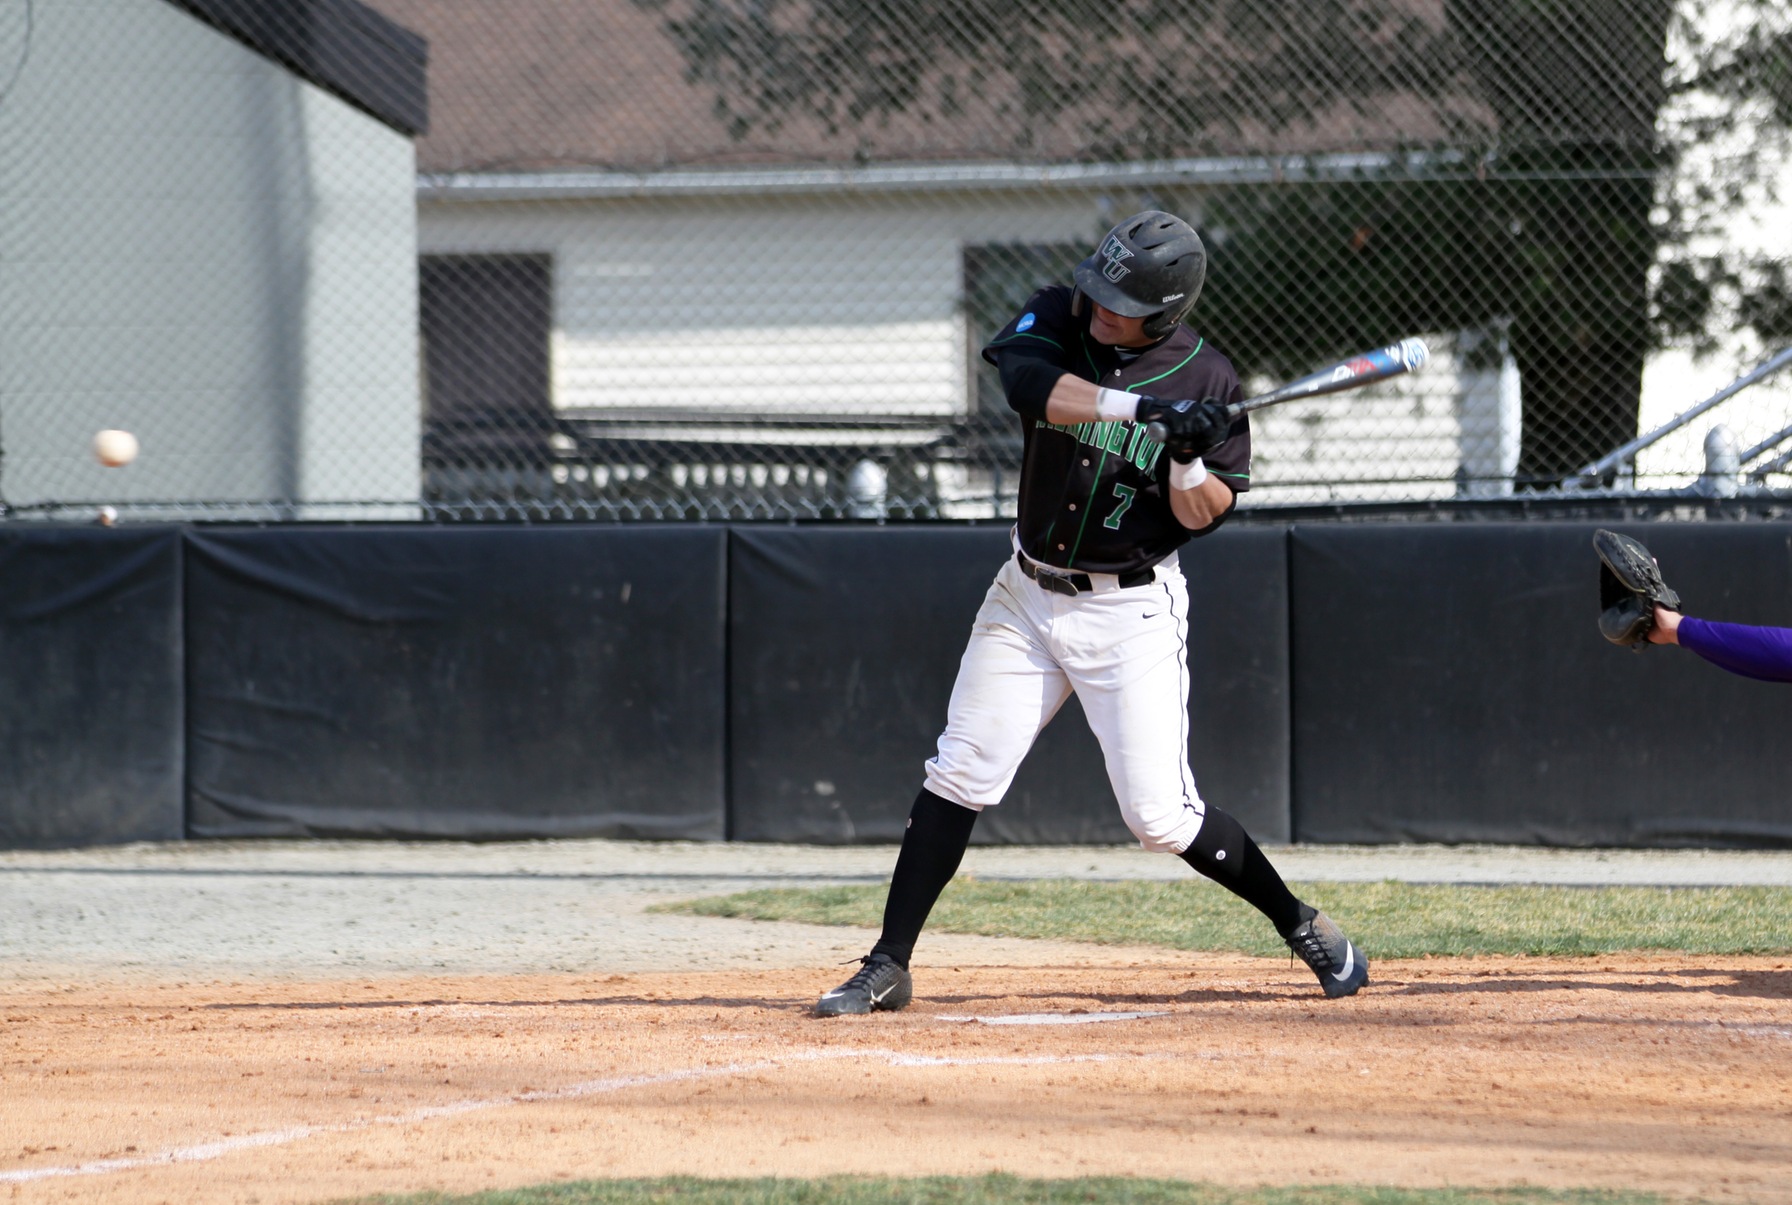 Copyright 2019; Wilmington University. All rights reserved. Photo of Kendall Small who had two RBI in game one on Saturday against Bridgeport. Photo by Dan Lauletta. March 16, 2019 vs. Bridgeport.